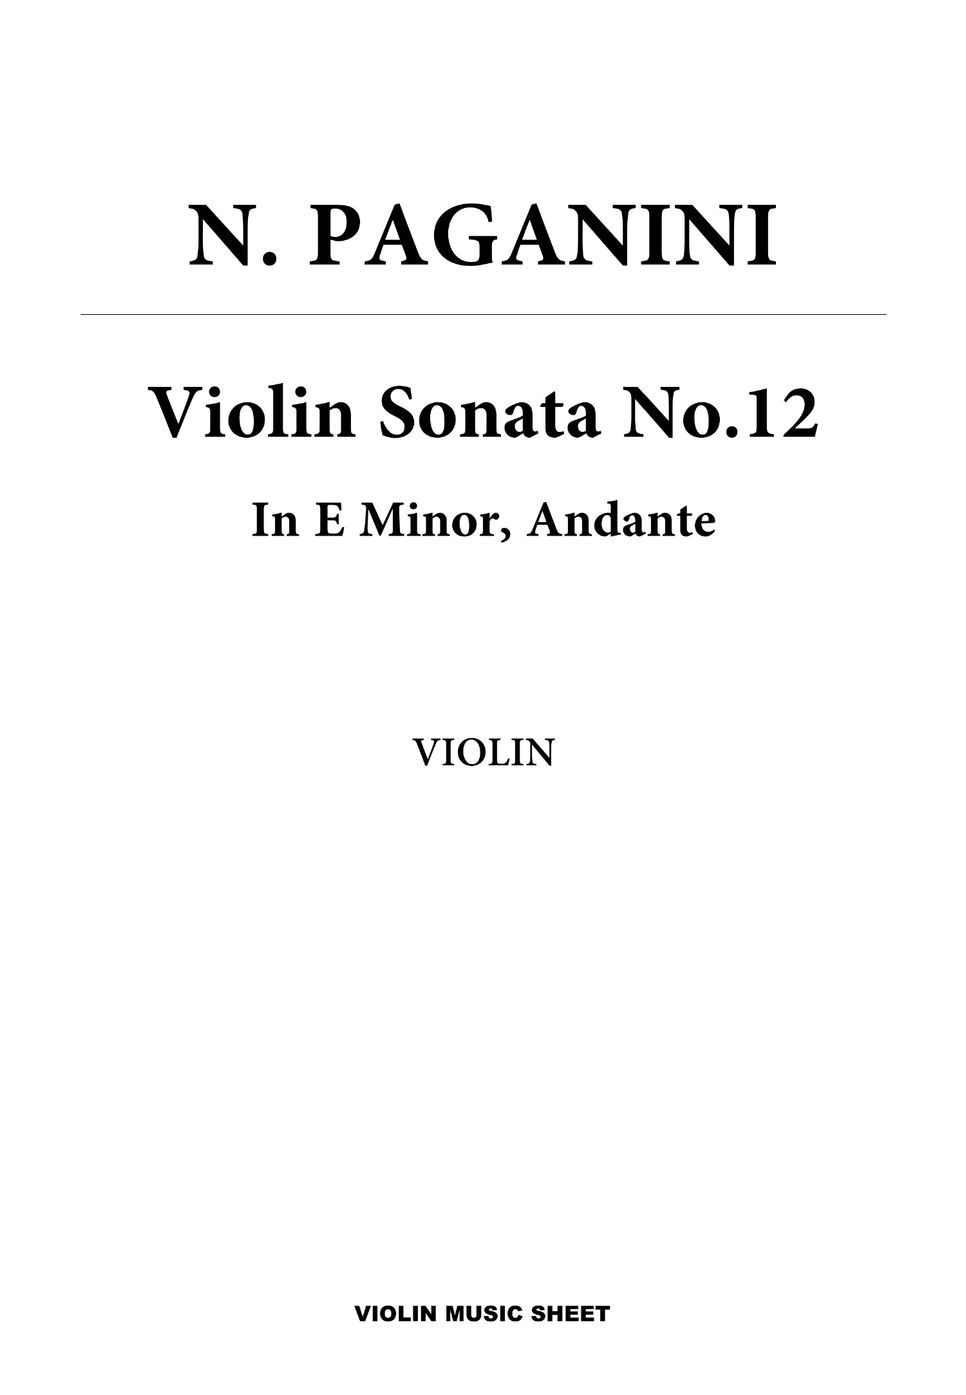 Paganini - Andante (MR포함) by Lee